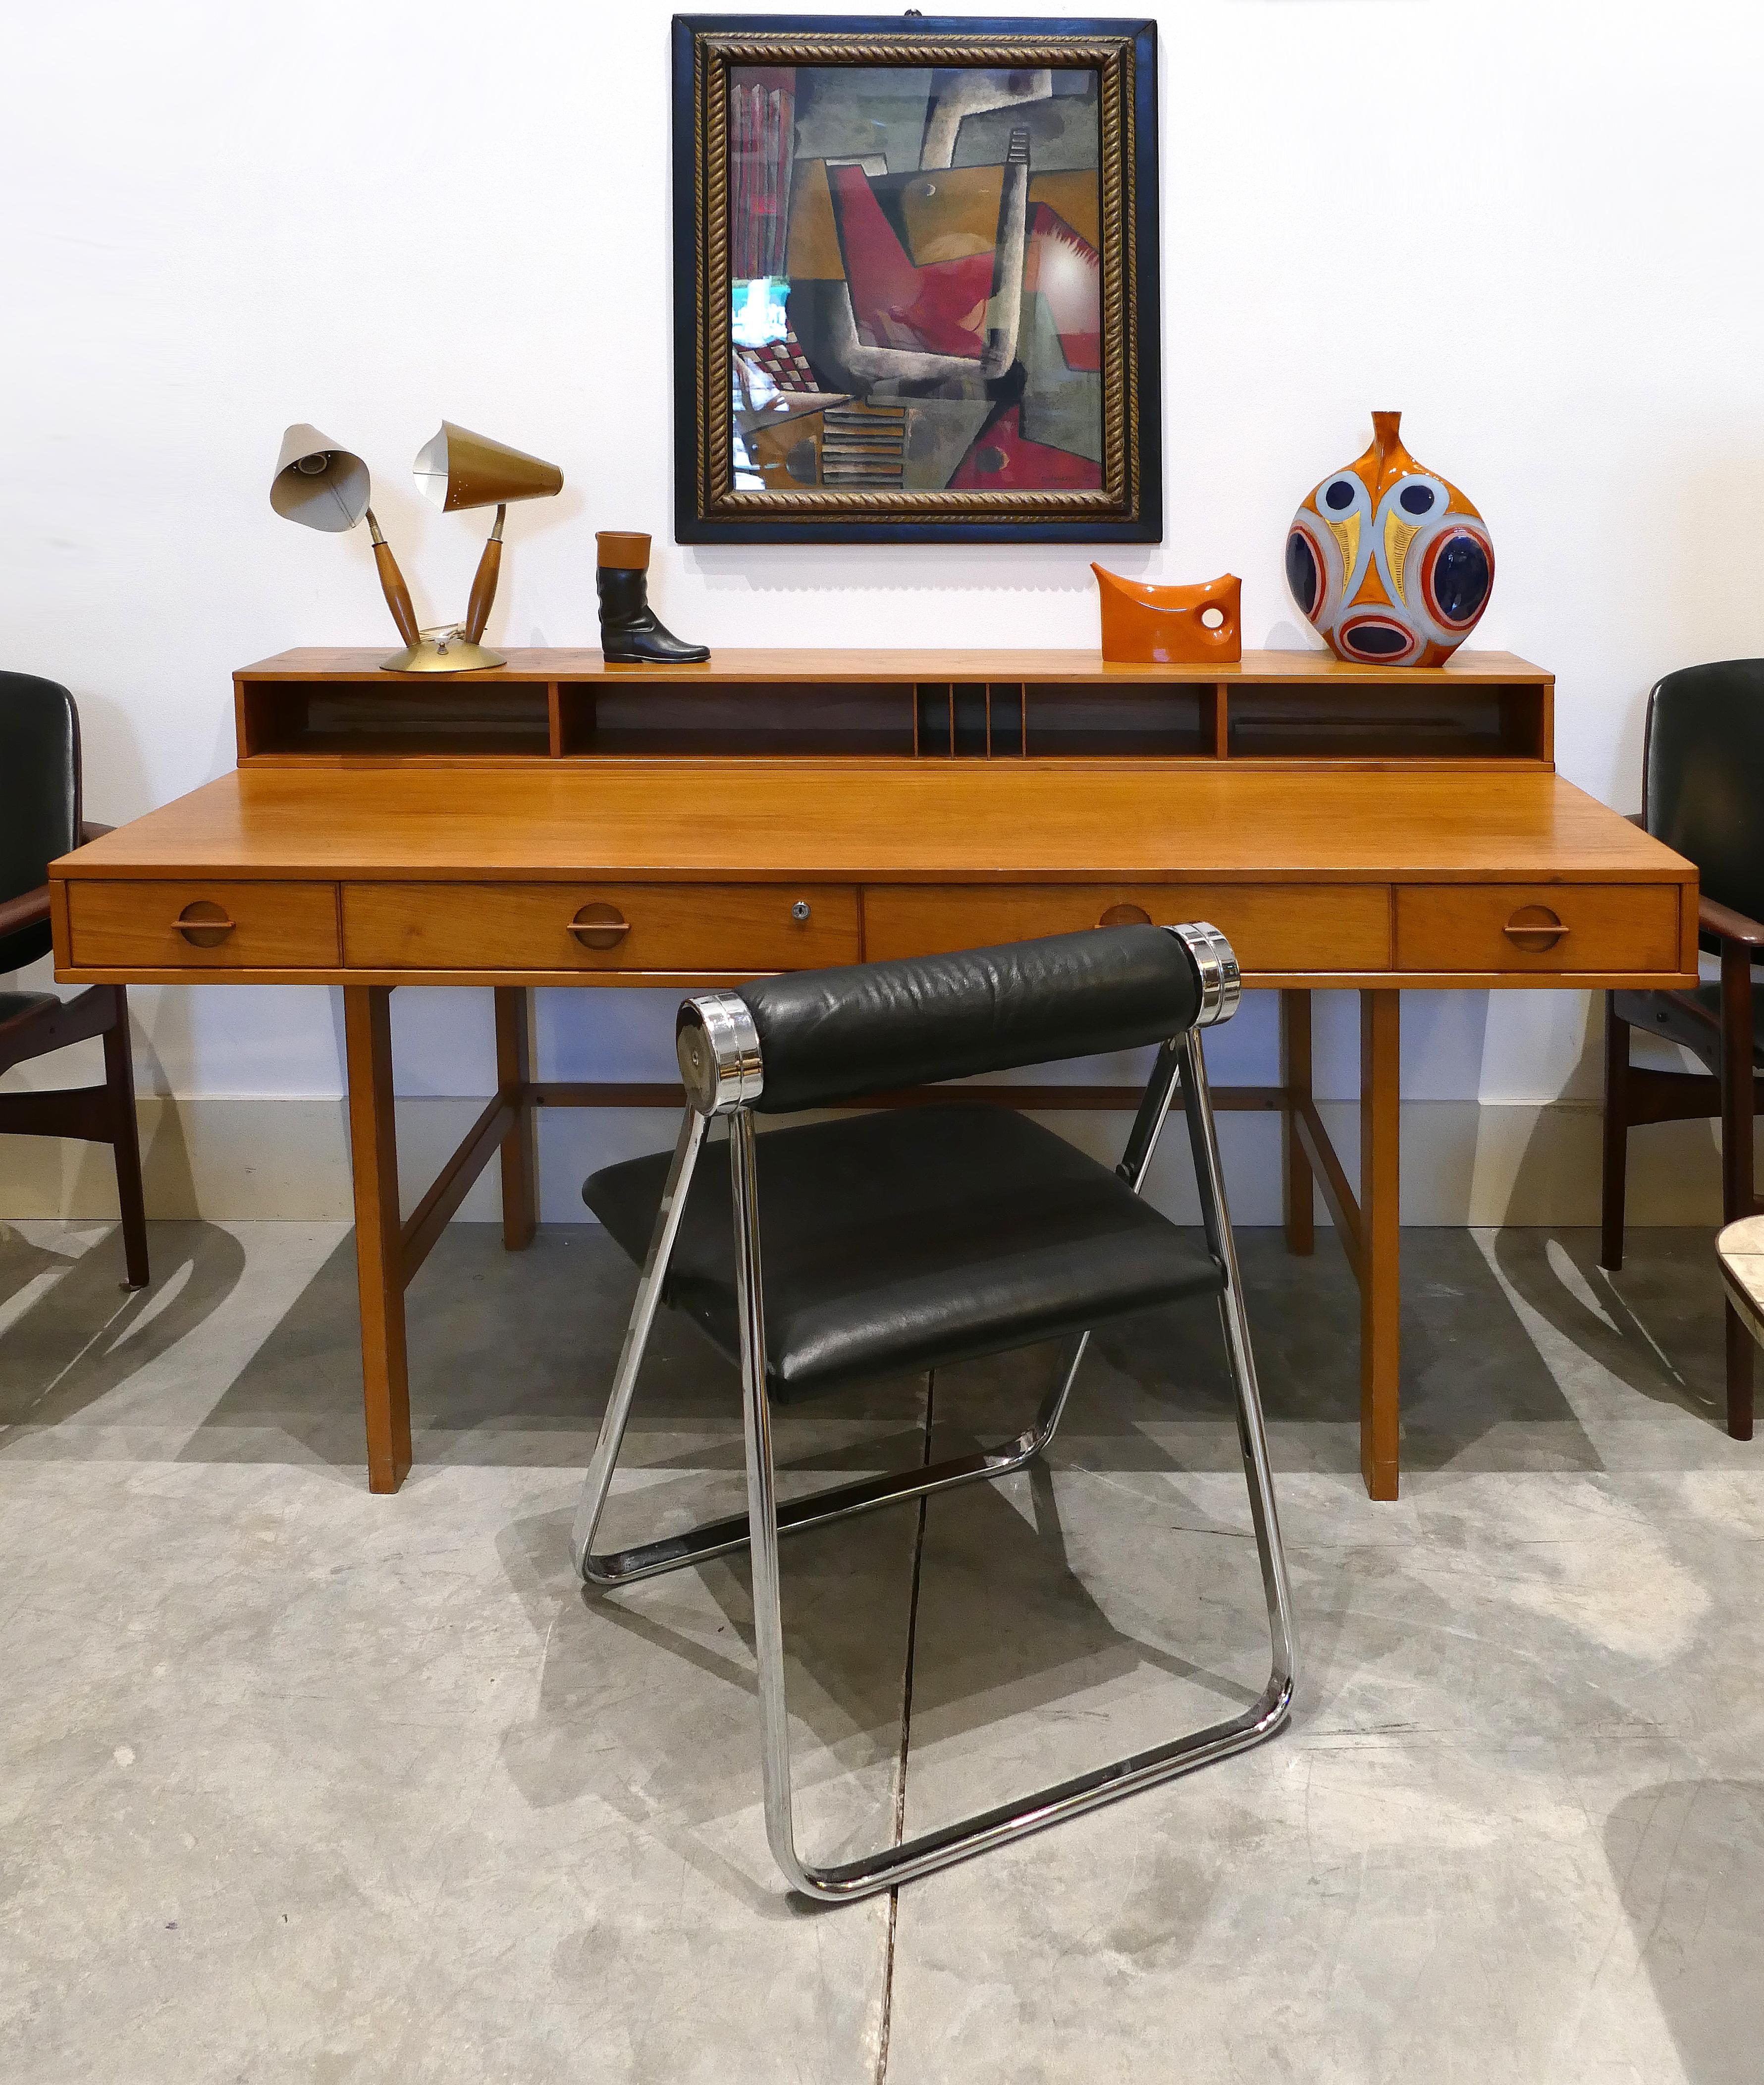 Danish modern Peter Løvig Nielsen flip topdesk designed by Jens Quistgaard

Offered for sale is a 1960s Danish modern Peter Løvig Nielsen flip topwriting architect's desk. The desk offers a very practical hinged gallery to top that flips down to